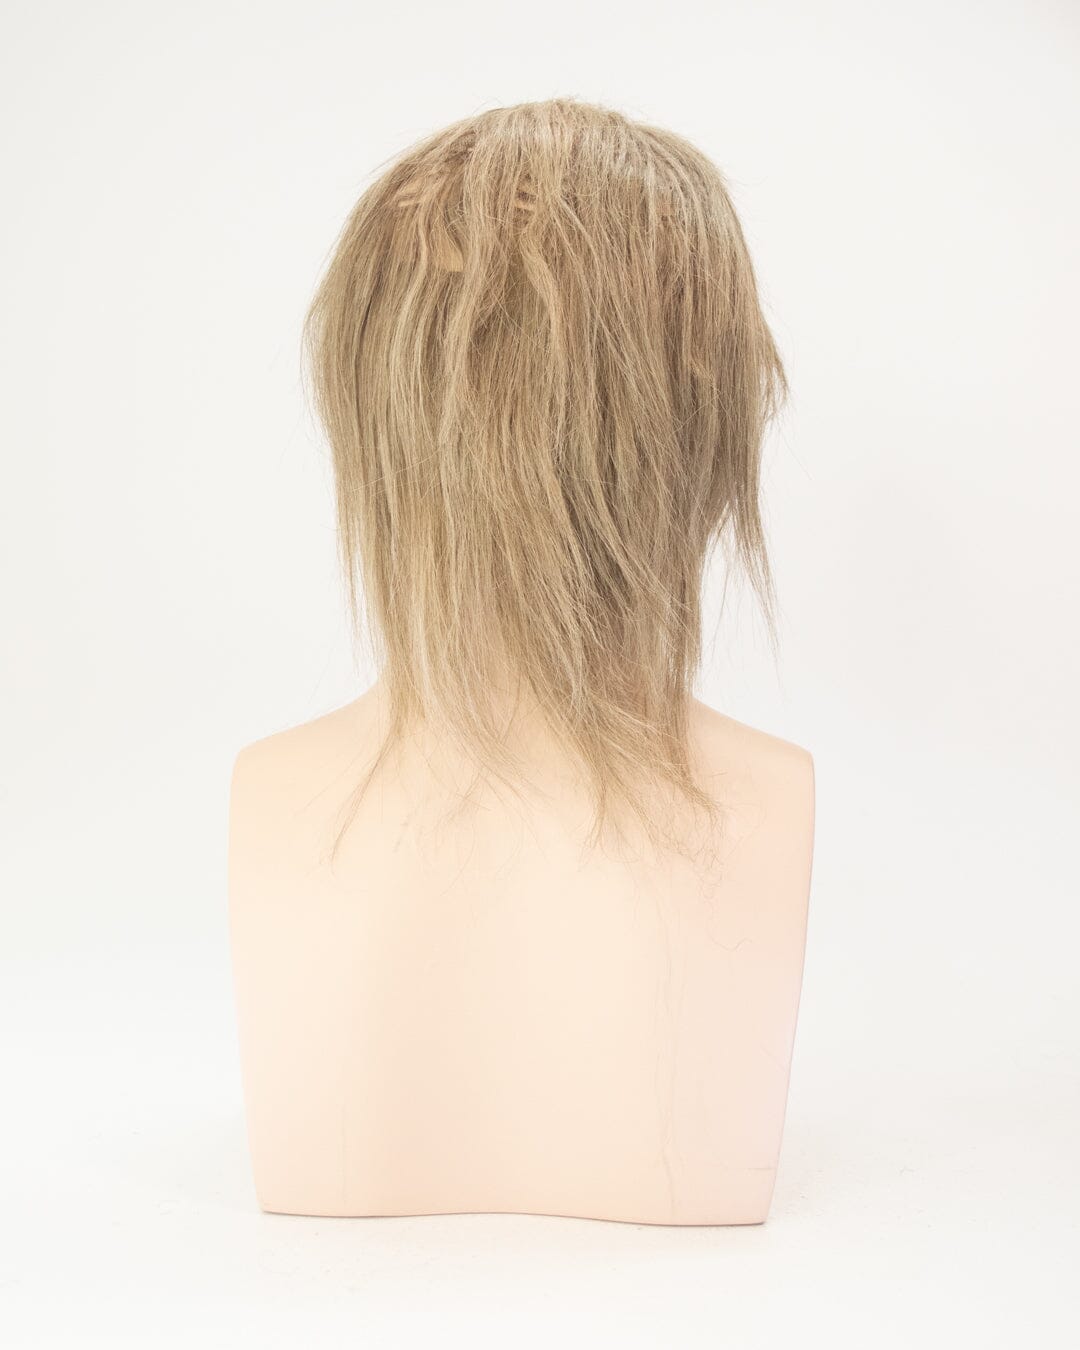 Mousey Brown 40cm Synthetic Hair Mullet Wig